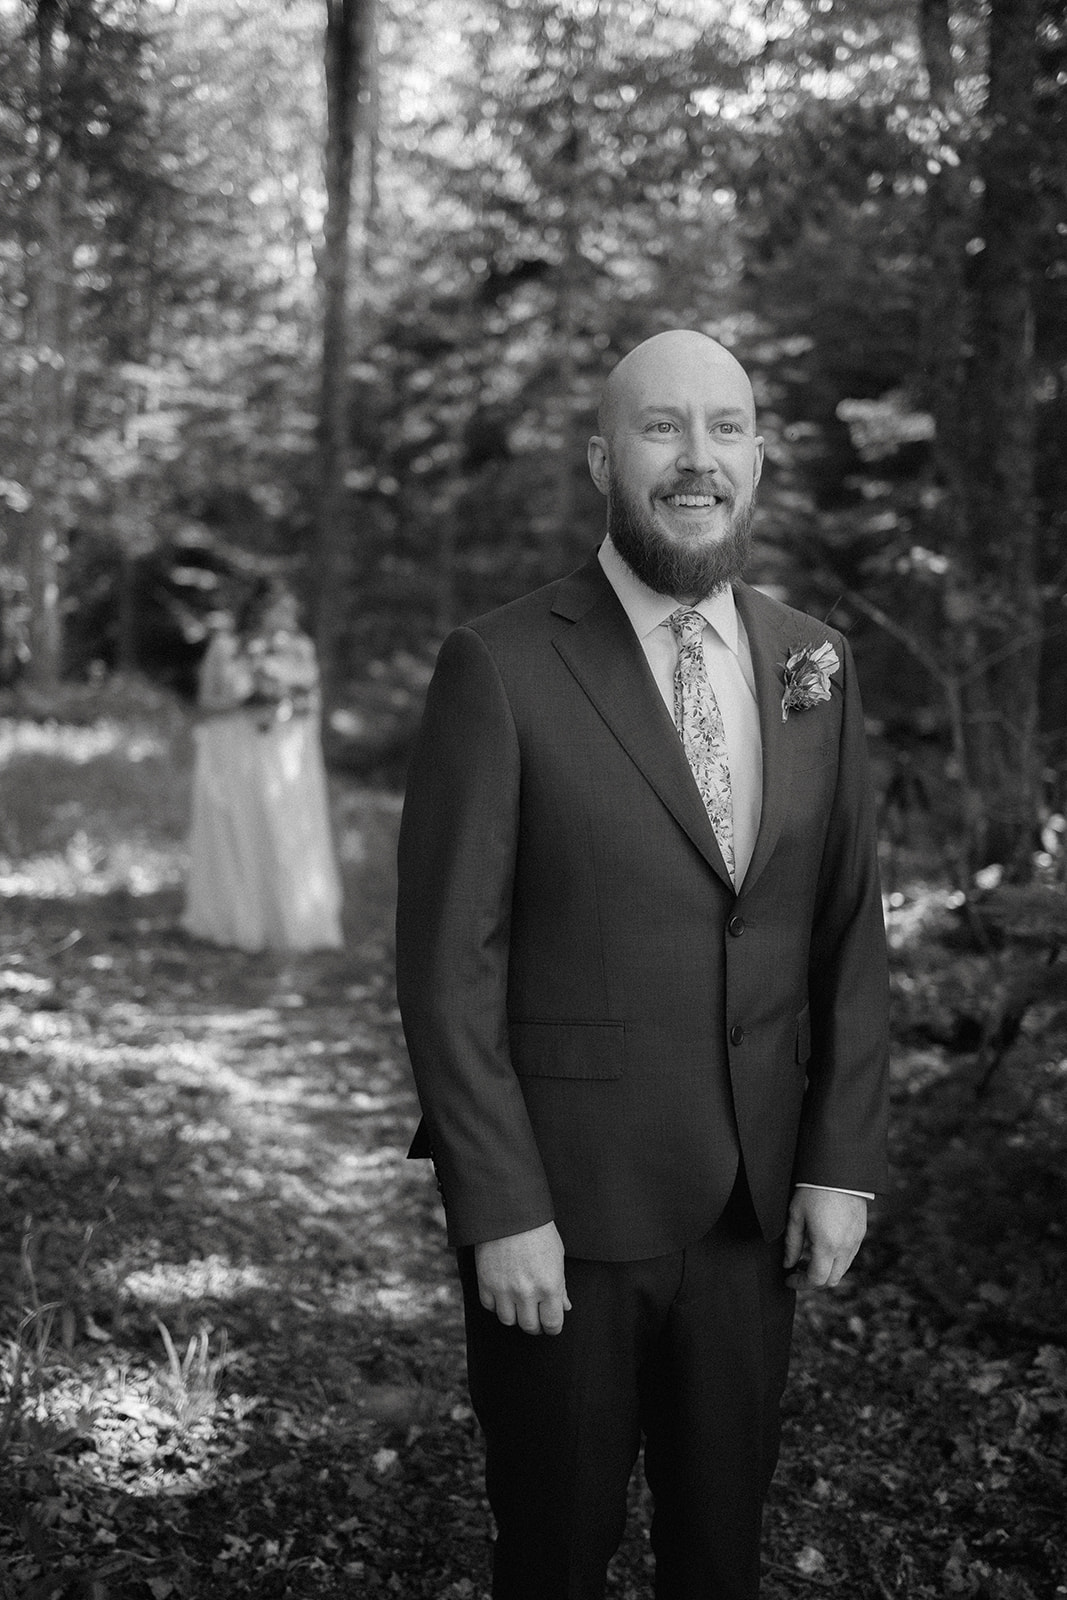 Stunning bride and groom take first look photos before their adventurous Adirondack mountain elopement